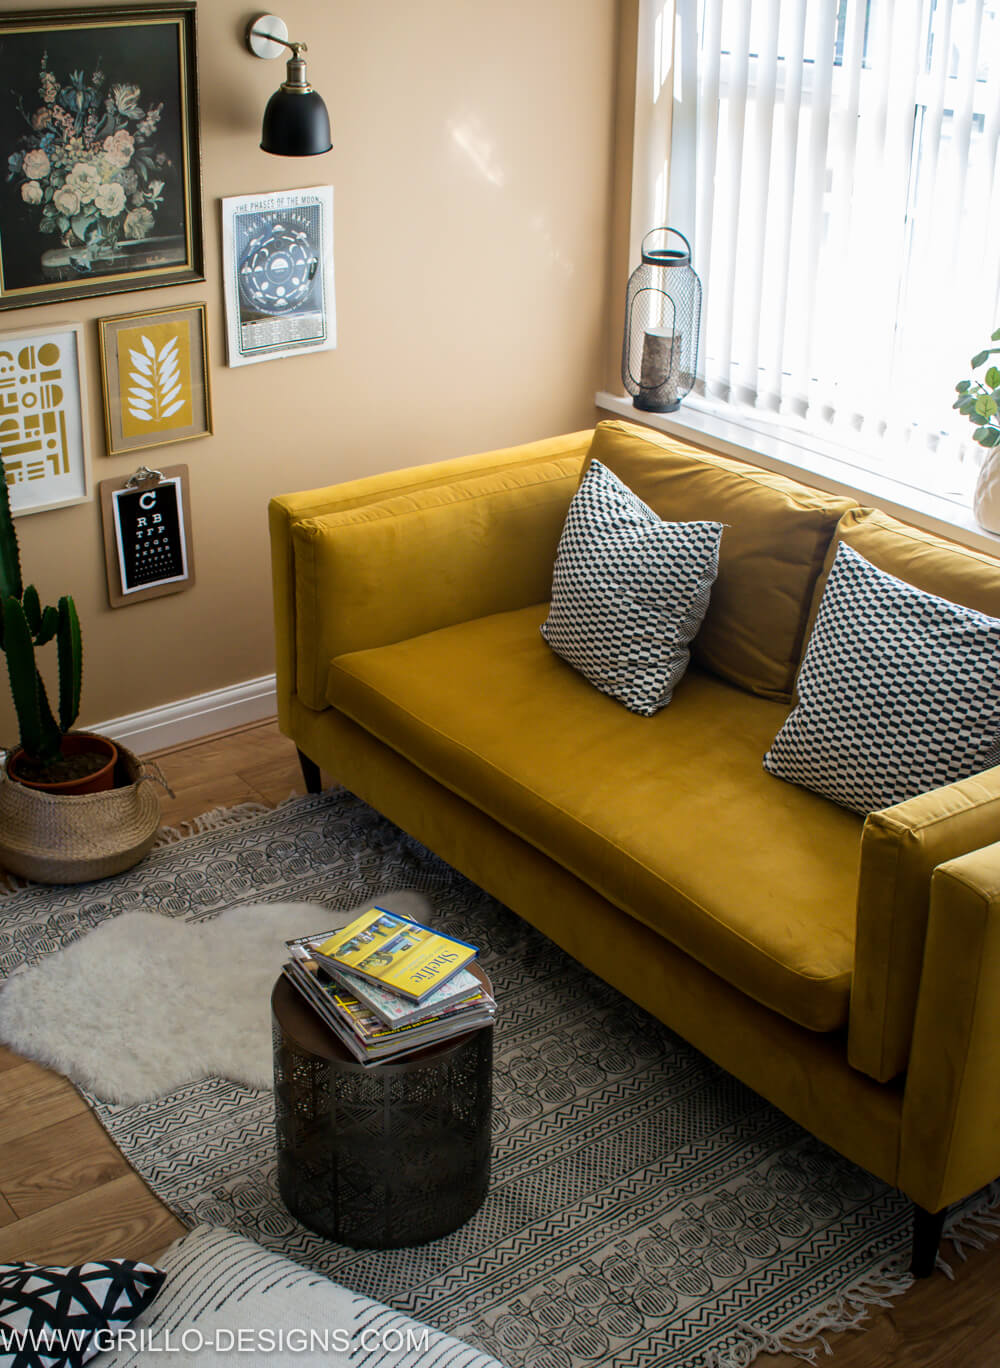 How to look after a velvet sofa when you have kids / grillo designs